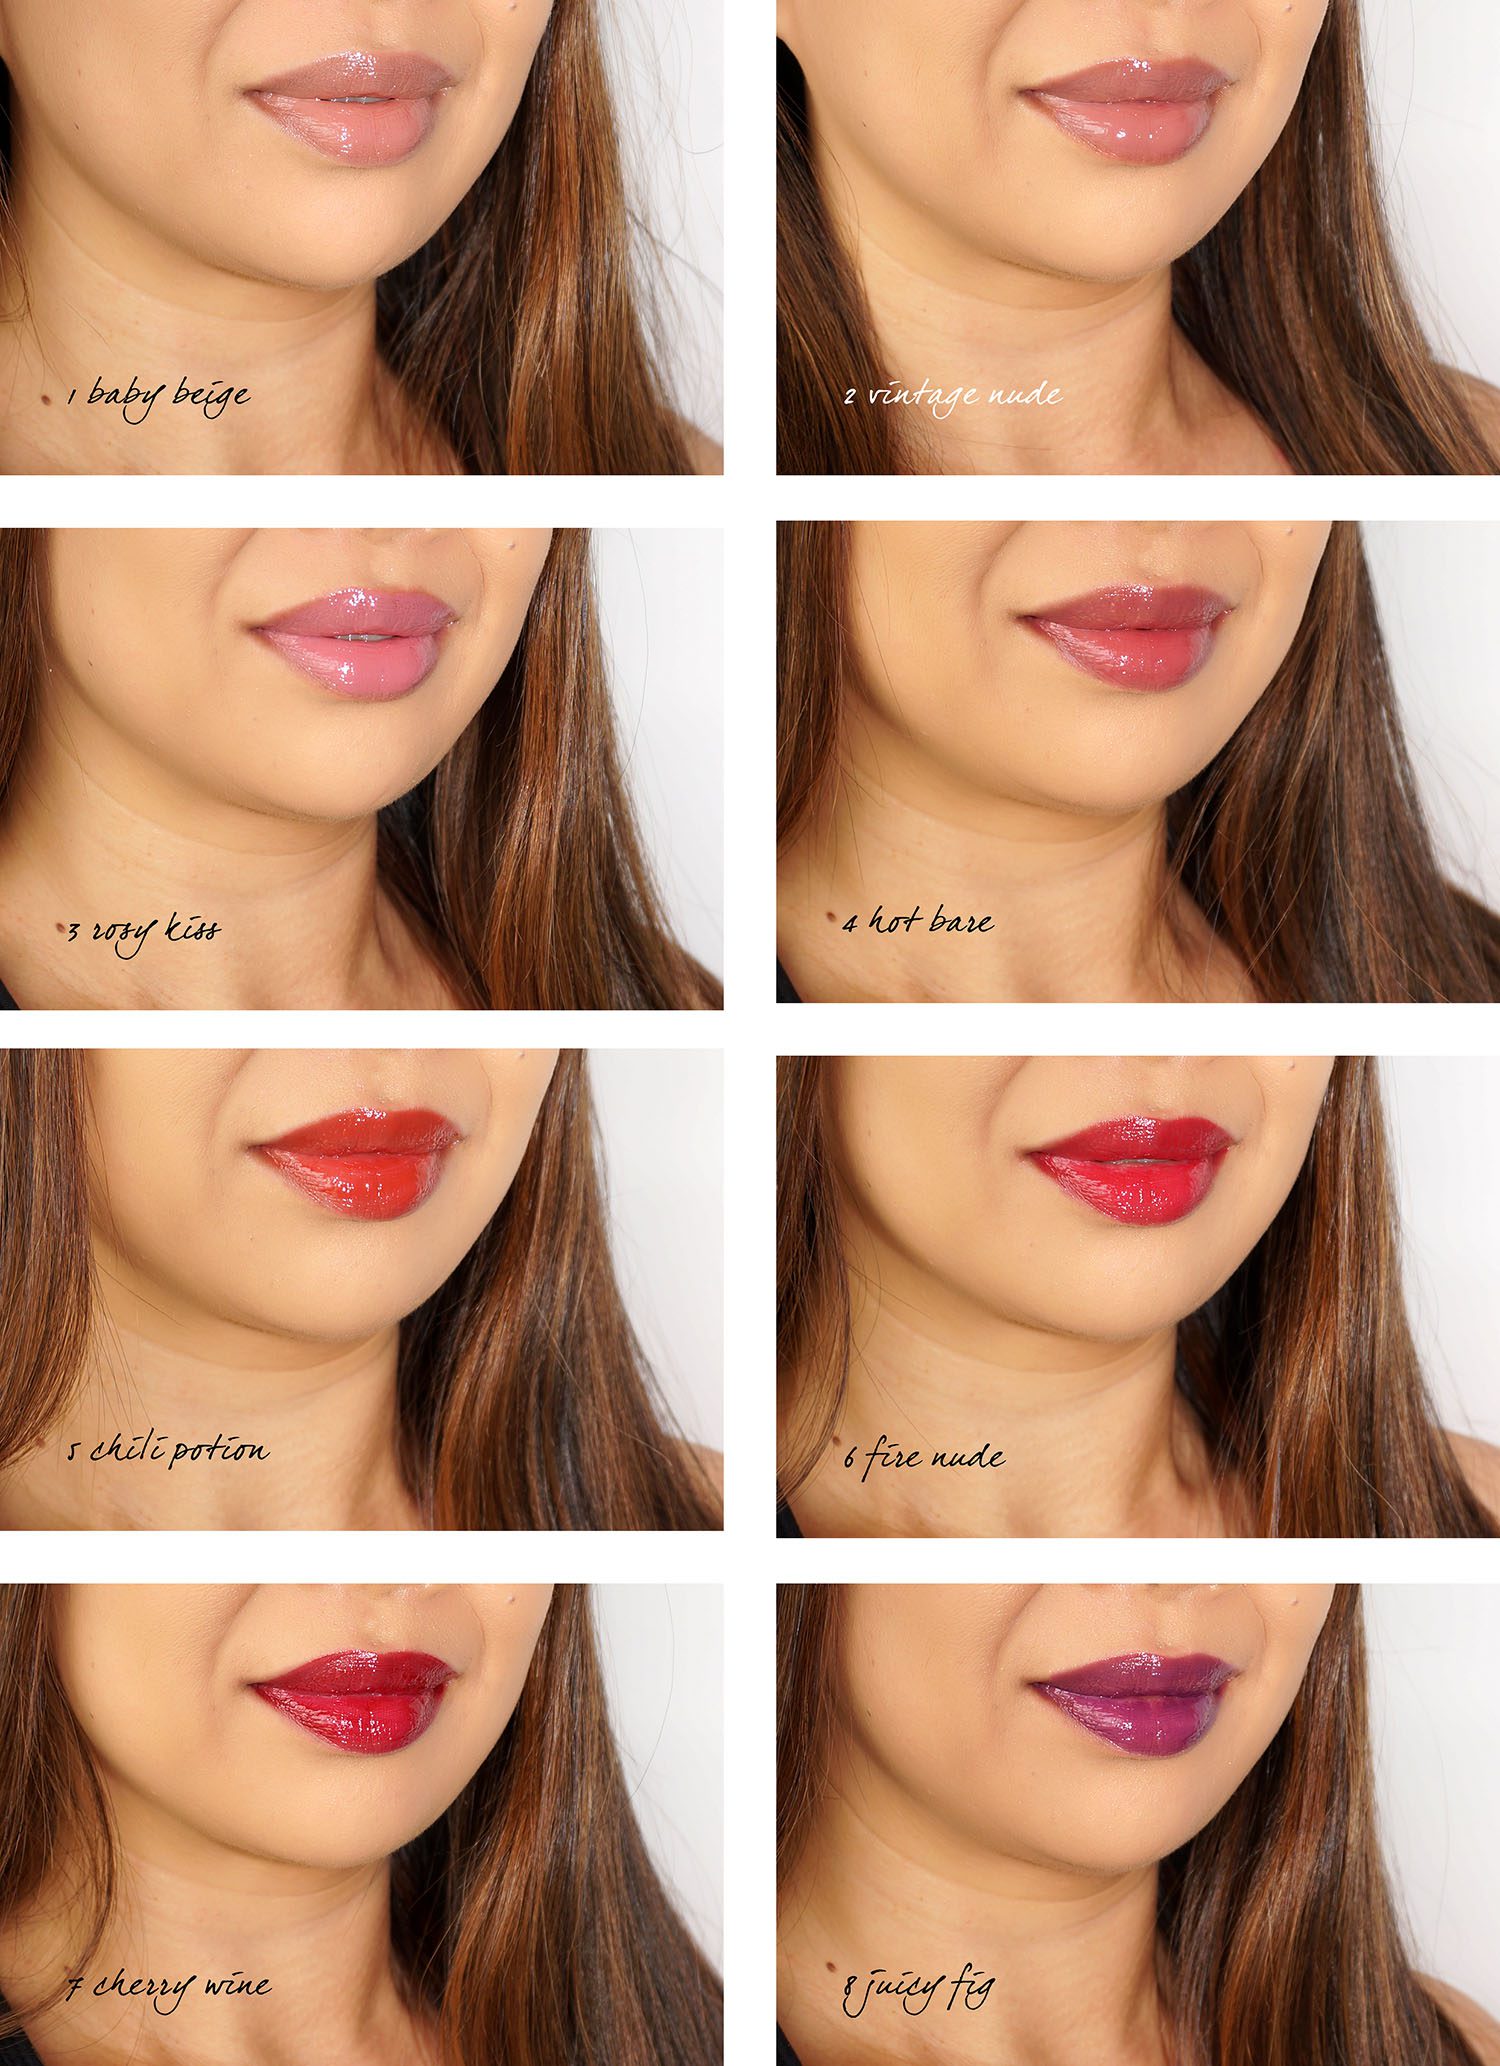 By Terry Lip-Expert Shine Review + Swatches - The Beauty Look Book